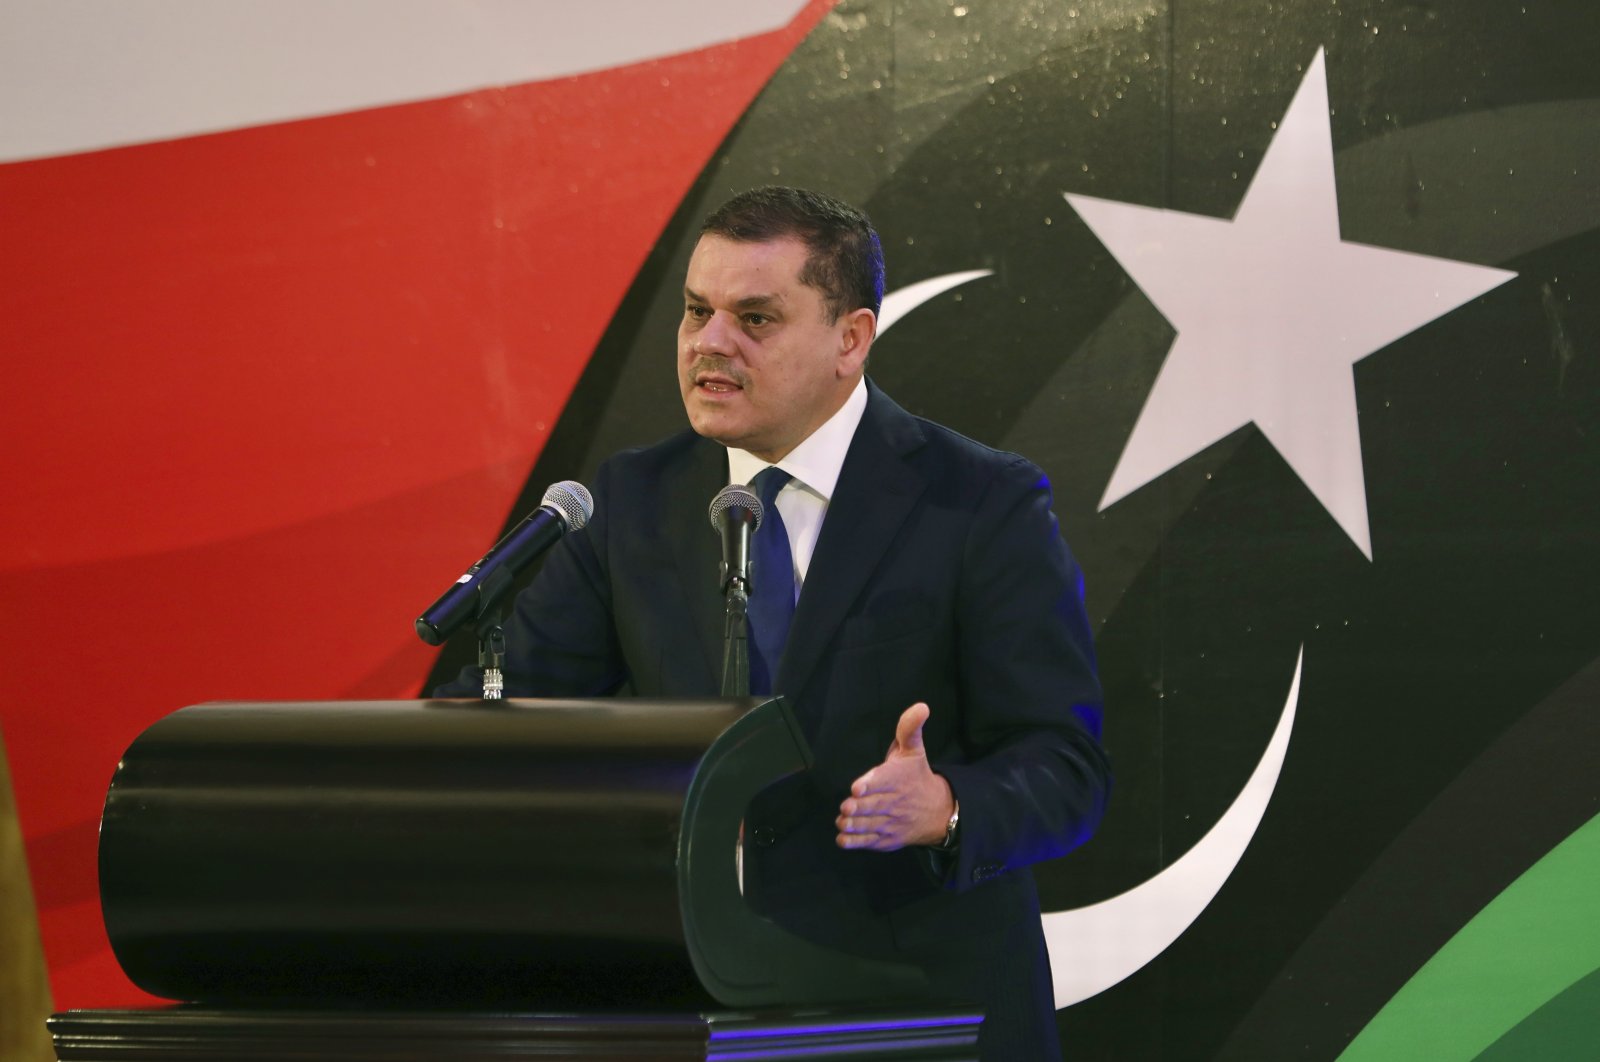 Managing Turkey for the benefit of Libya, Prime Minister Dbeibah